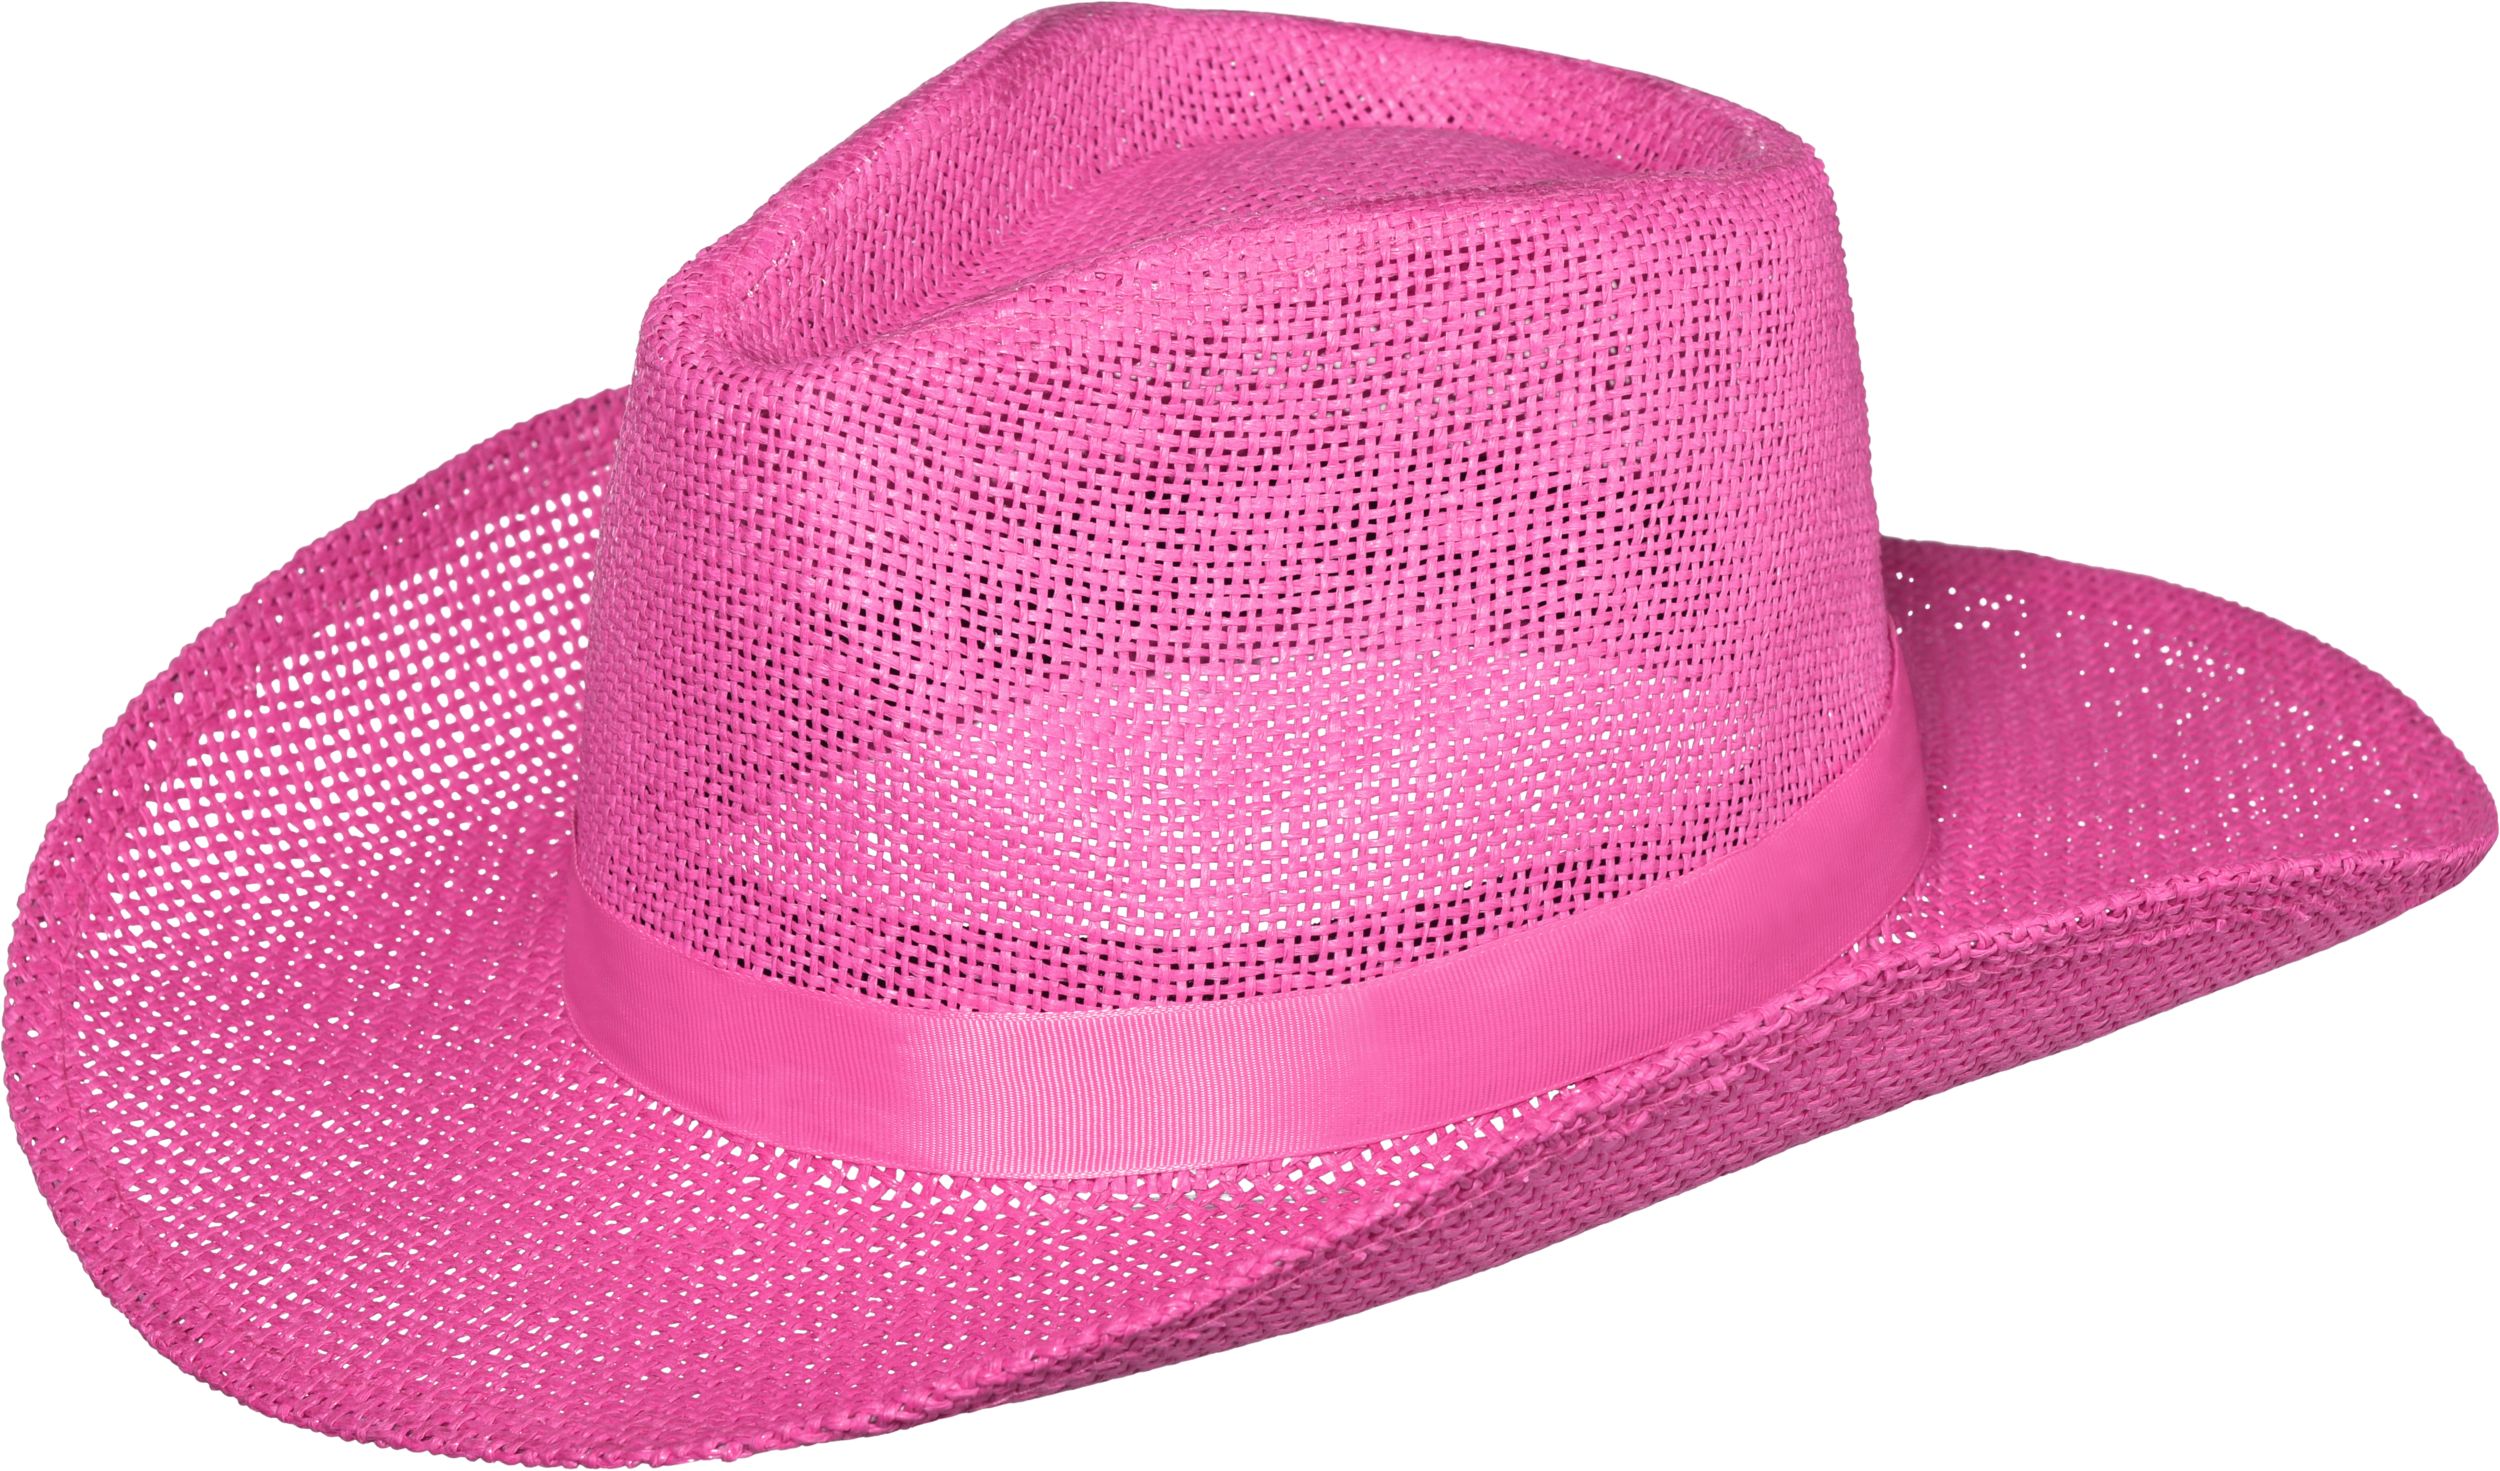 Western Mesh Cowboy Hat, Assorted Colours, One Size, Wearable Costume  Accessory for Halloween